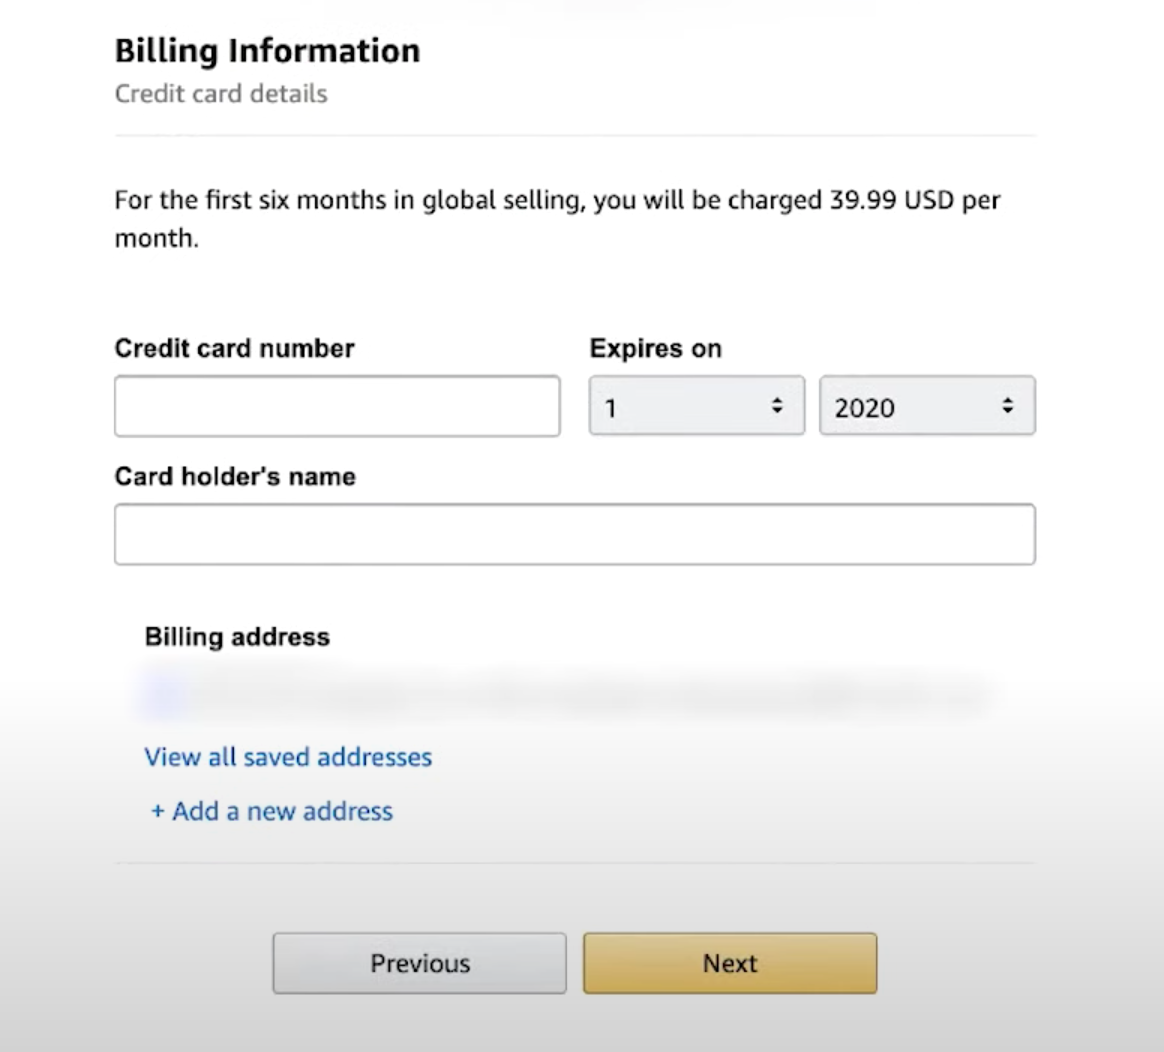 You will need to enter your billing information